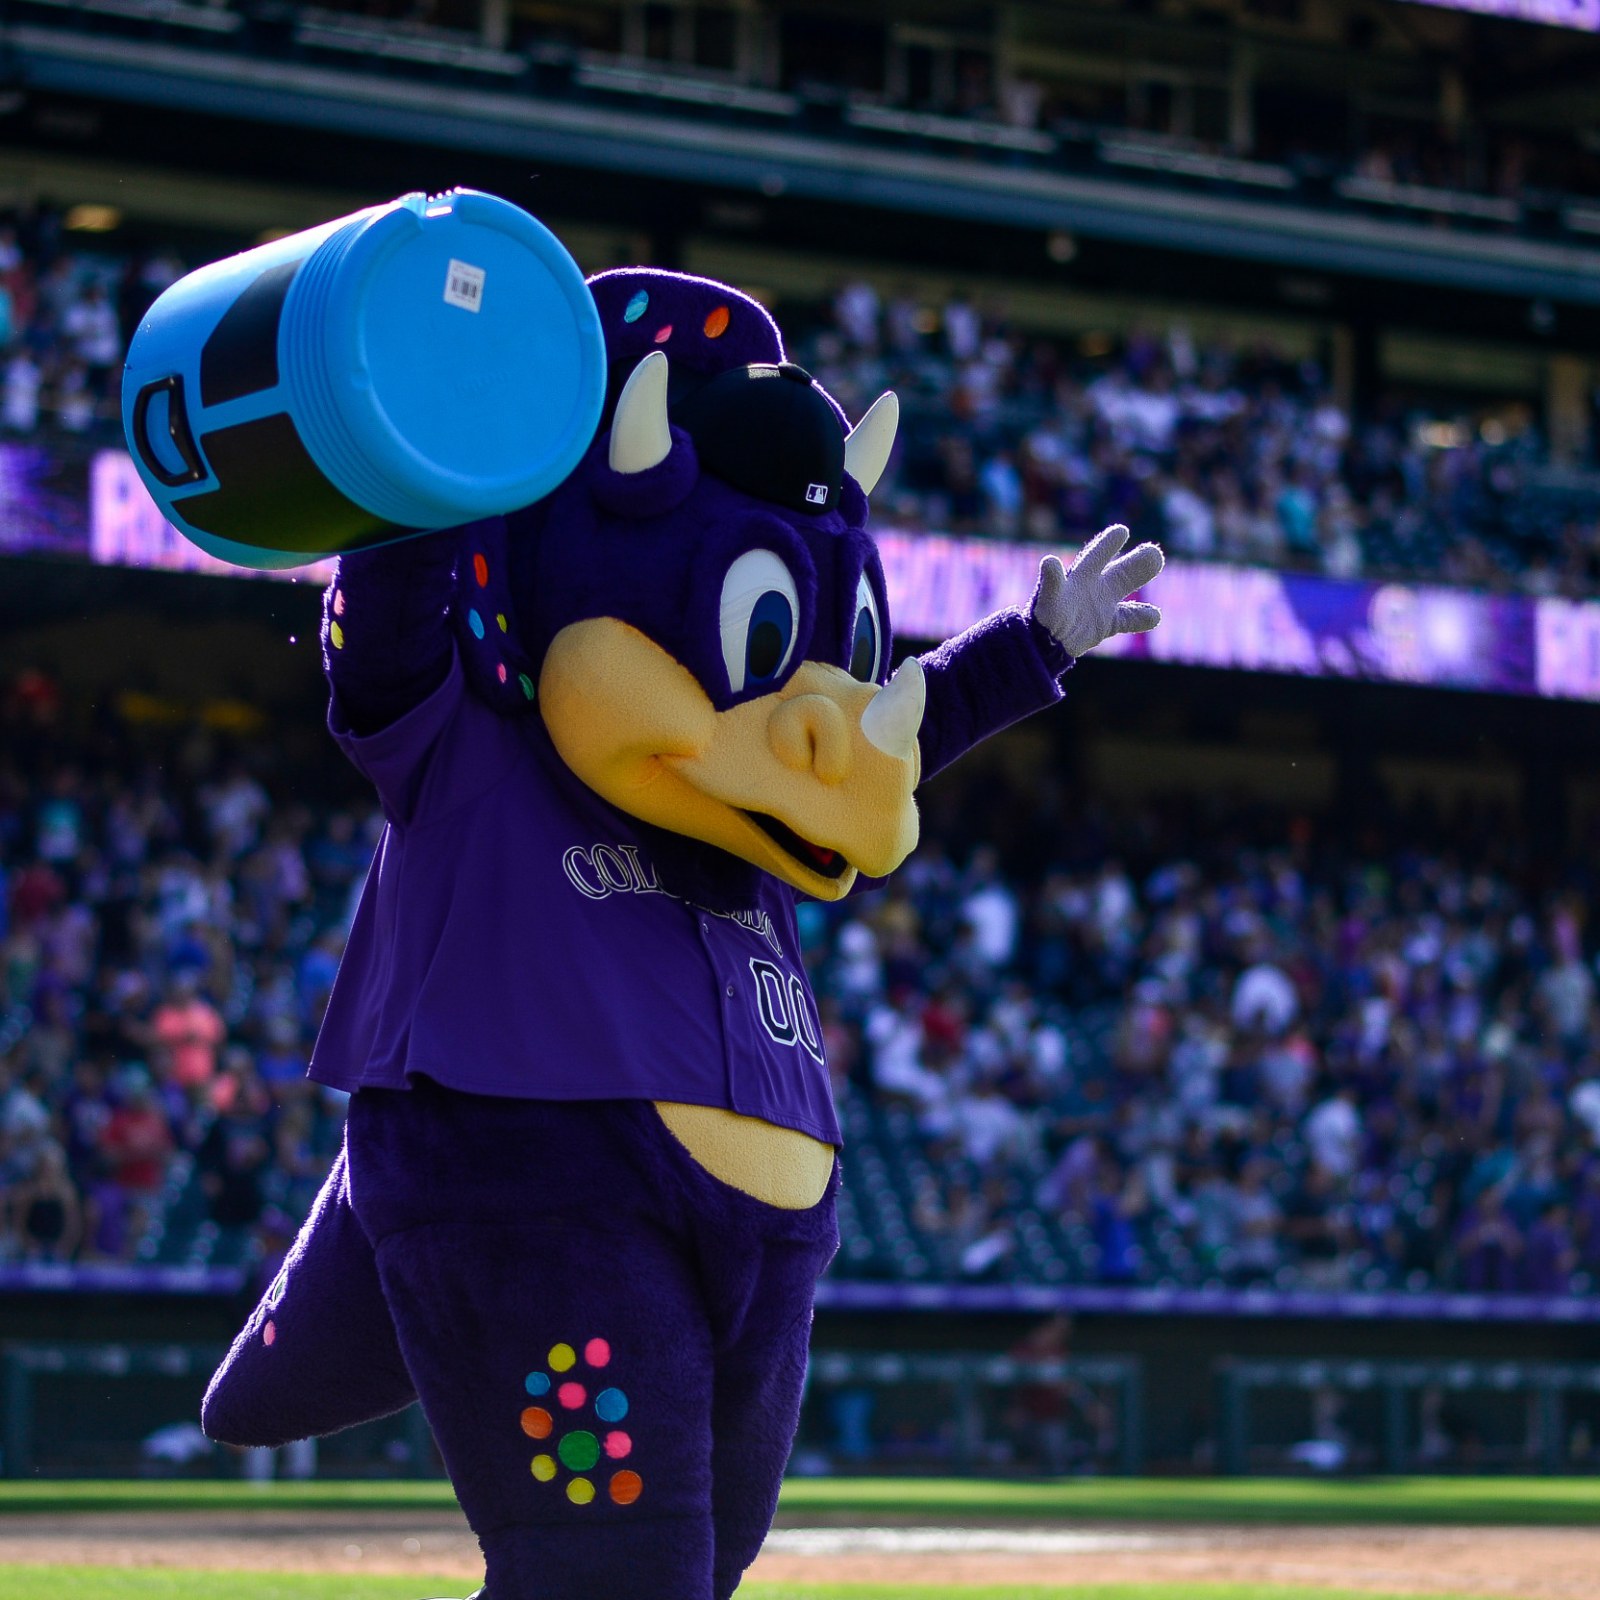 How Do You Feel About Dinger, The Rockies Mascot?